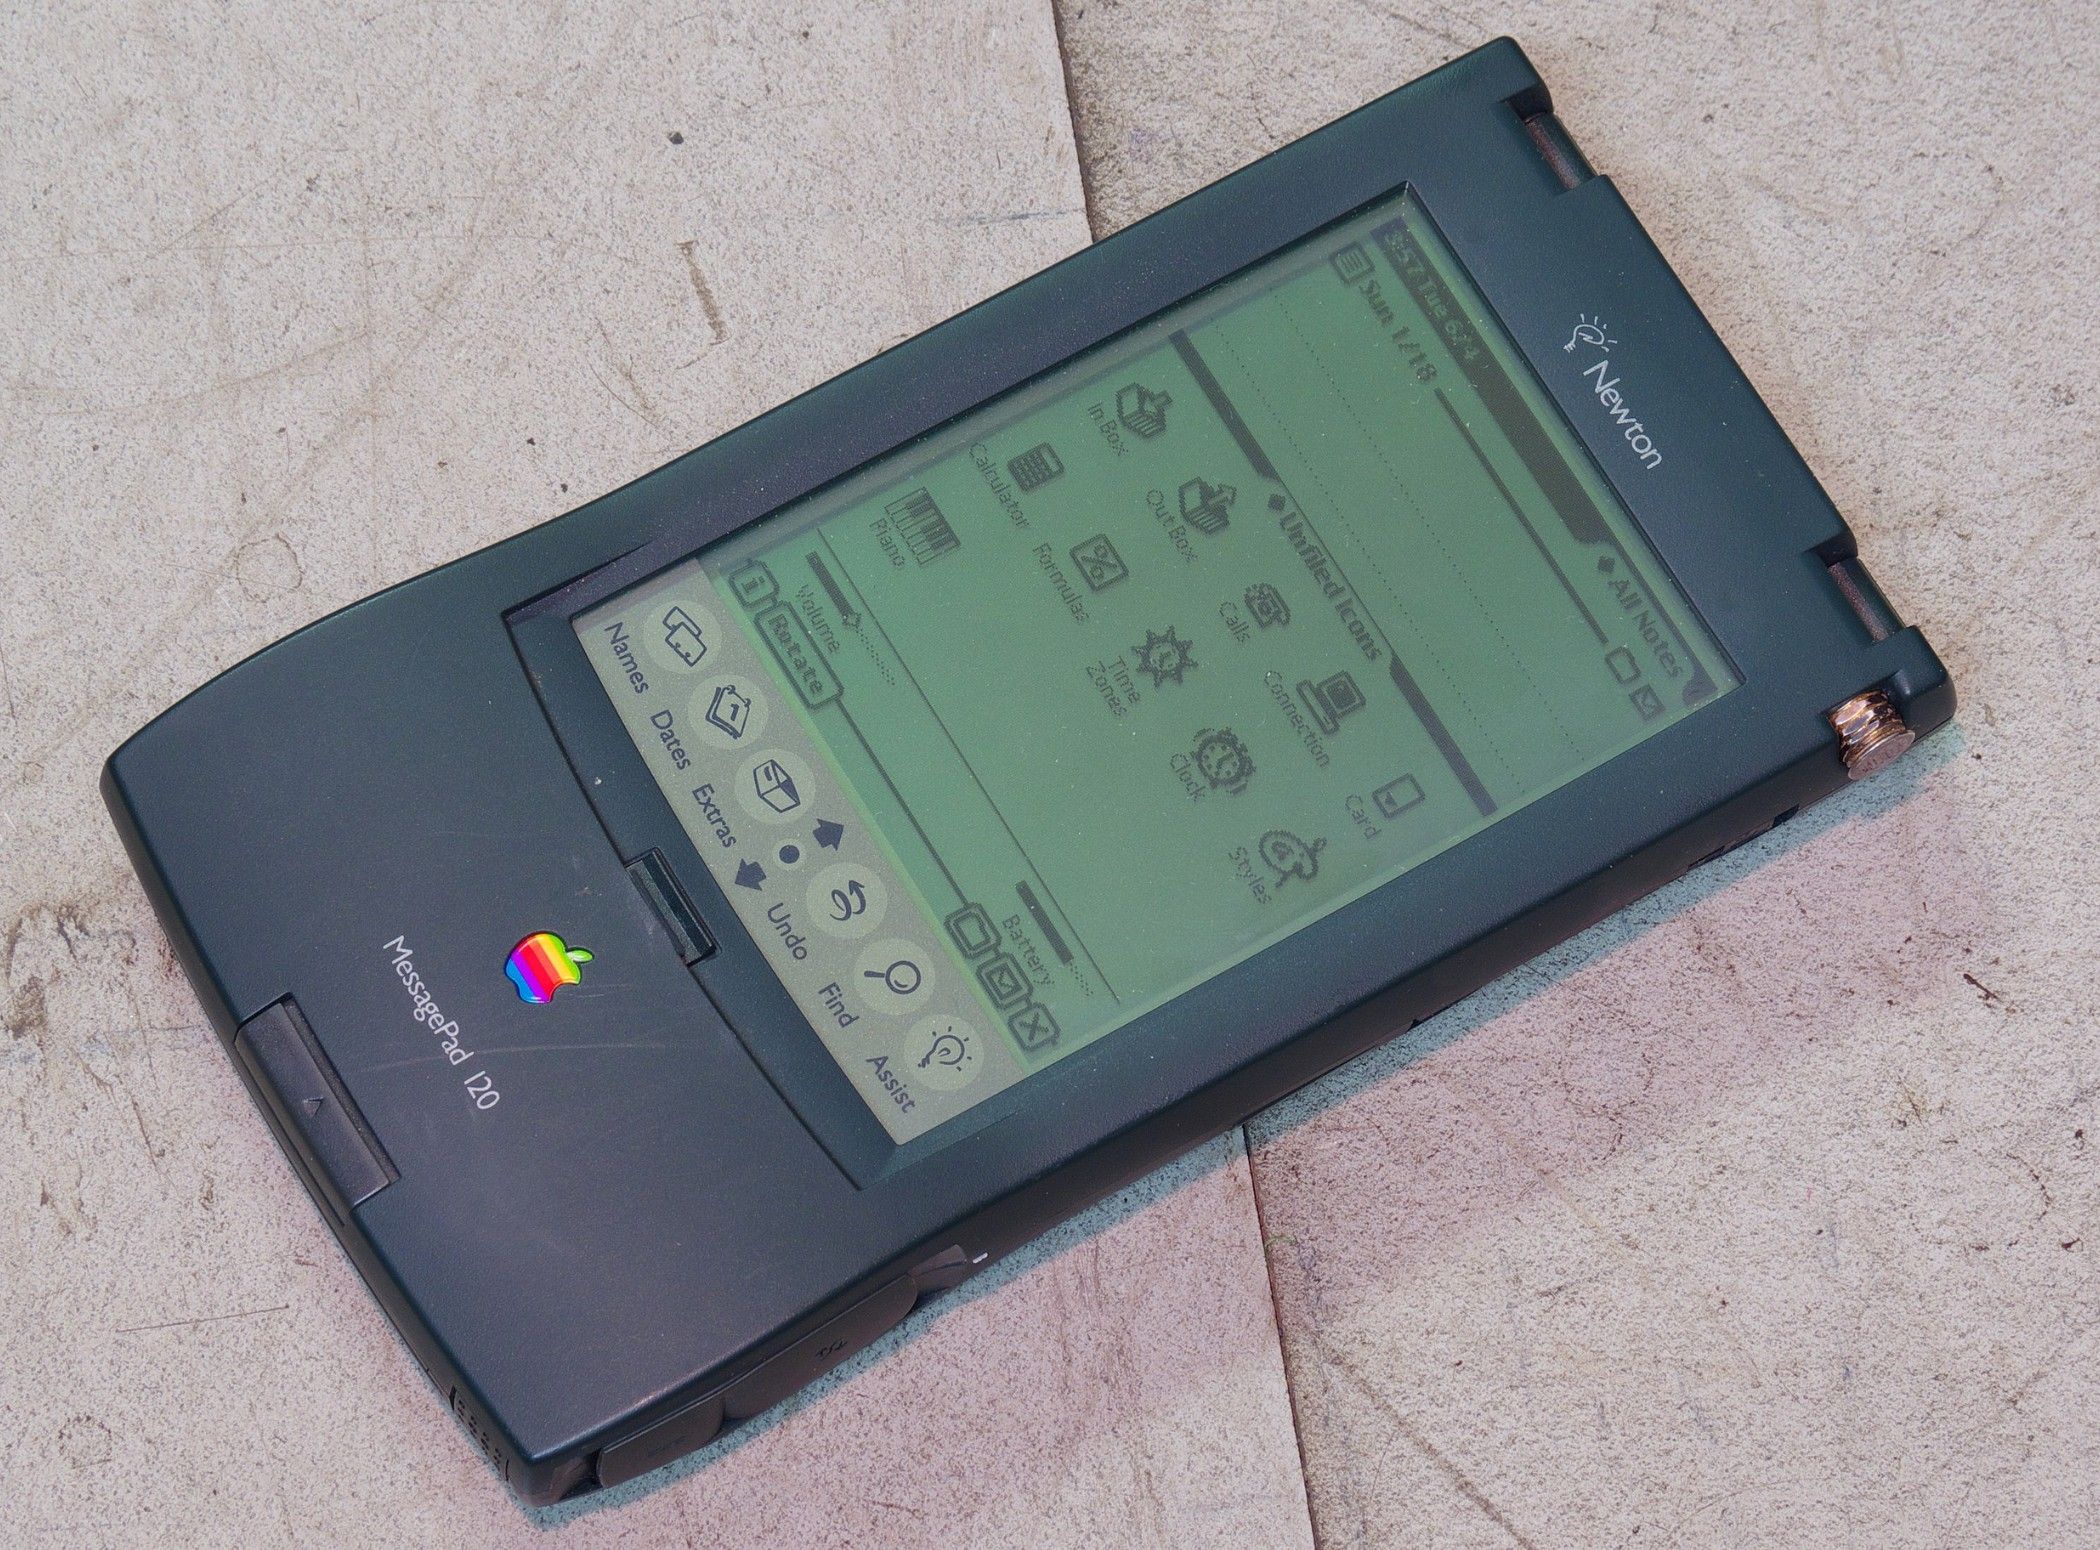 Apple Newton MessagePad PDA with screen turned on